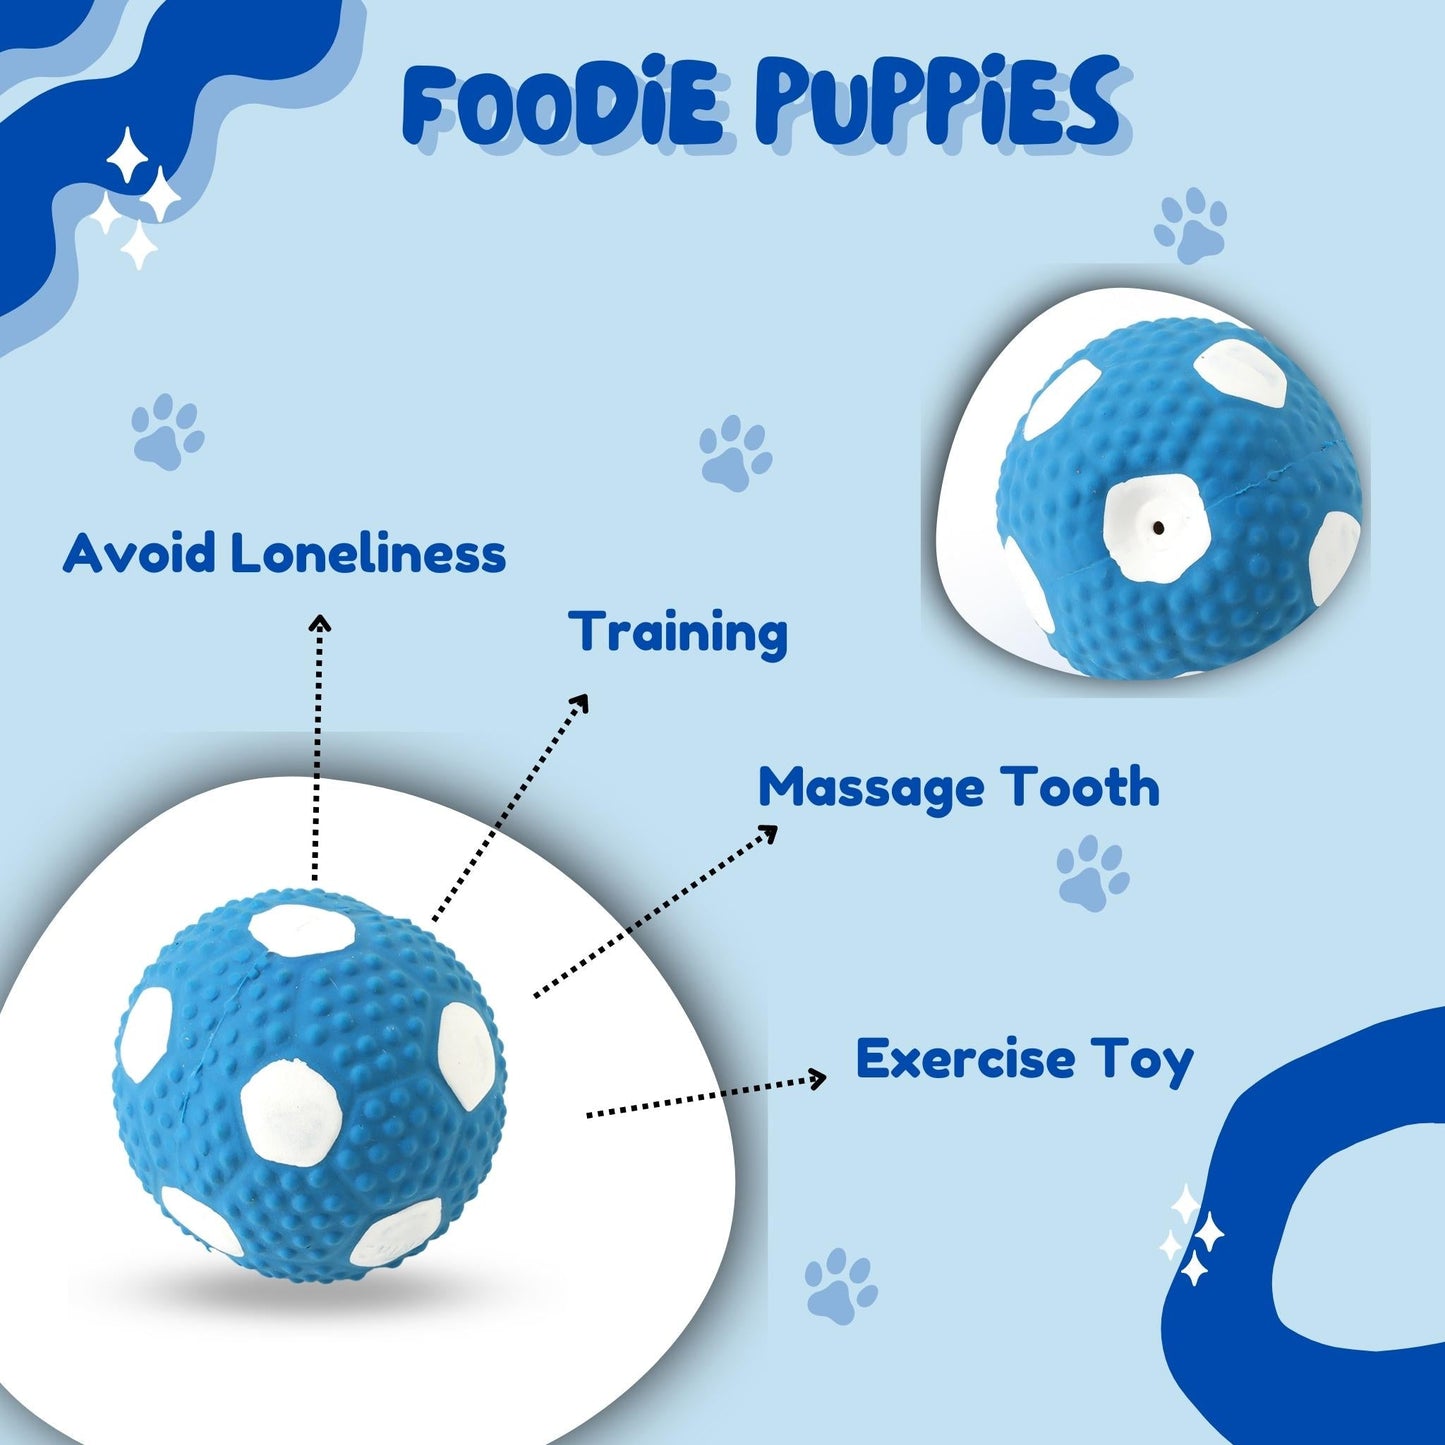 Foodie Puppies Latex Squeaky Toy for Medium Dog - Blue Football, Large